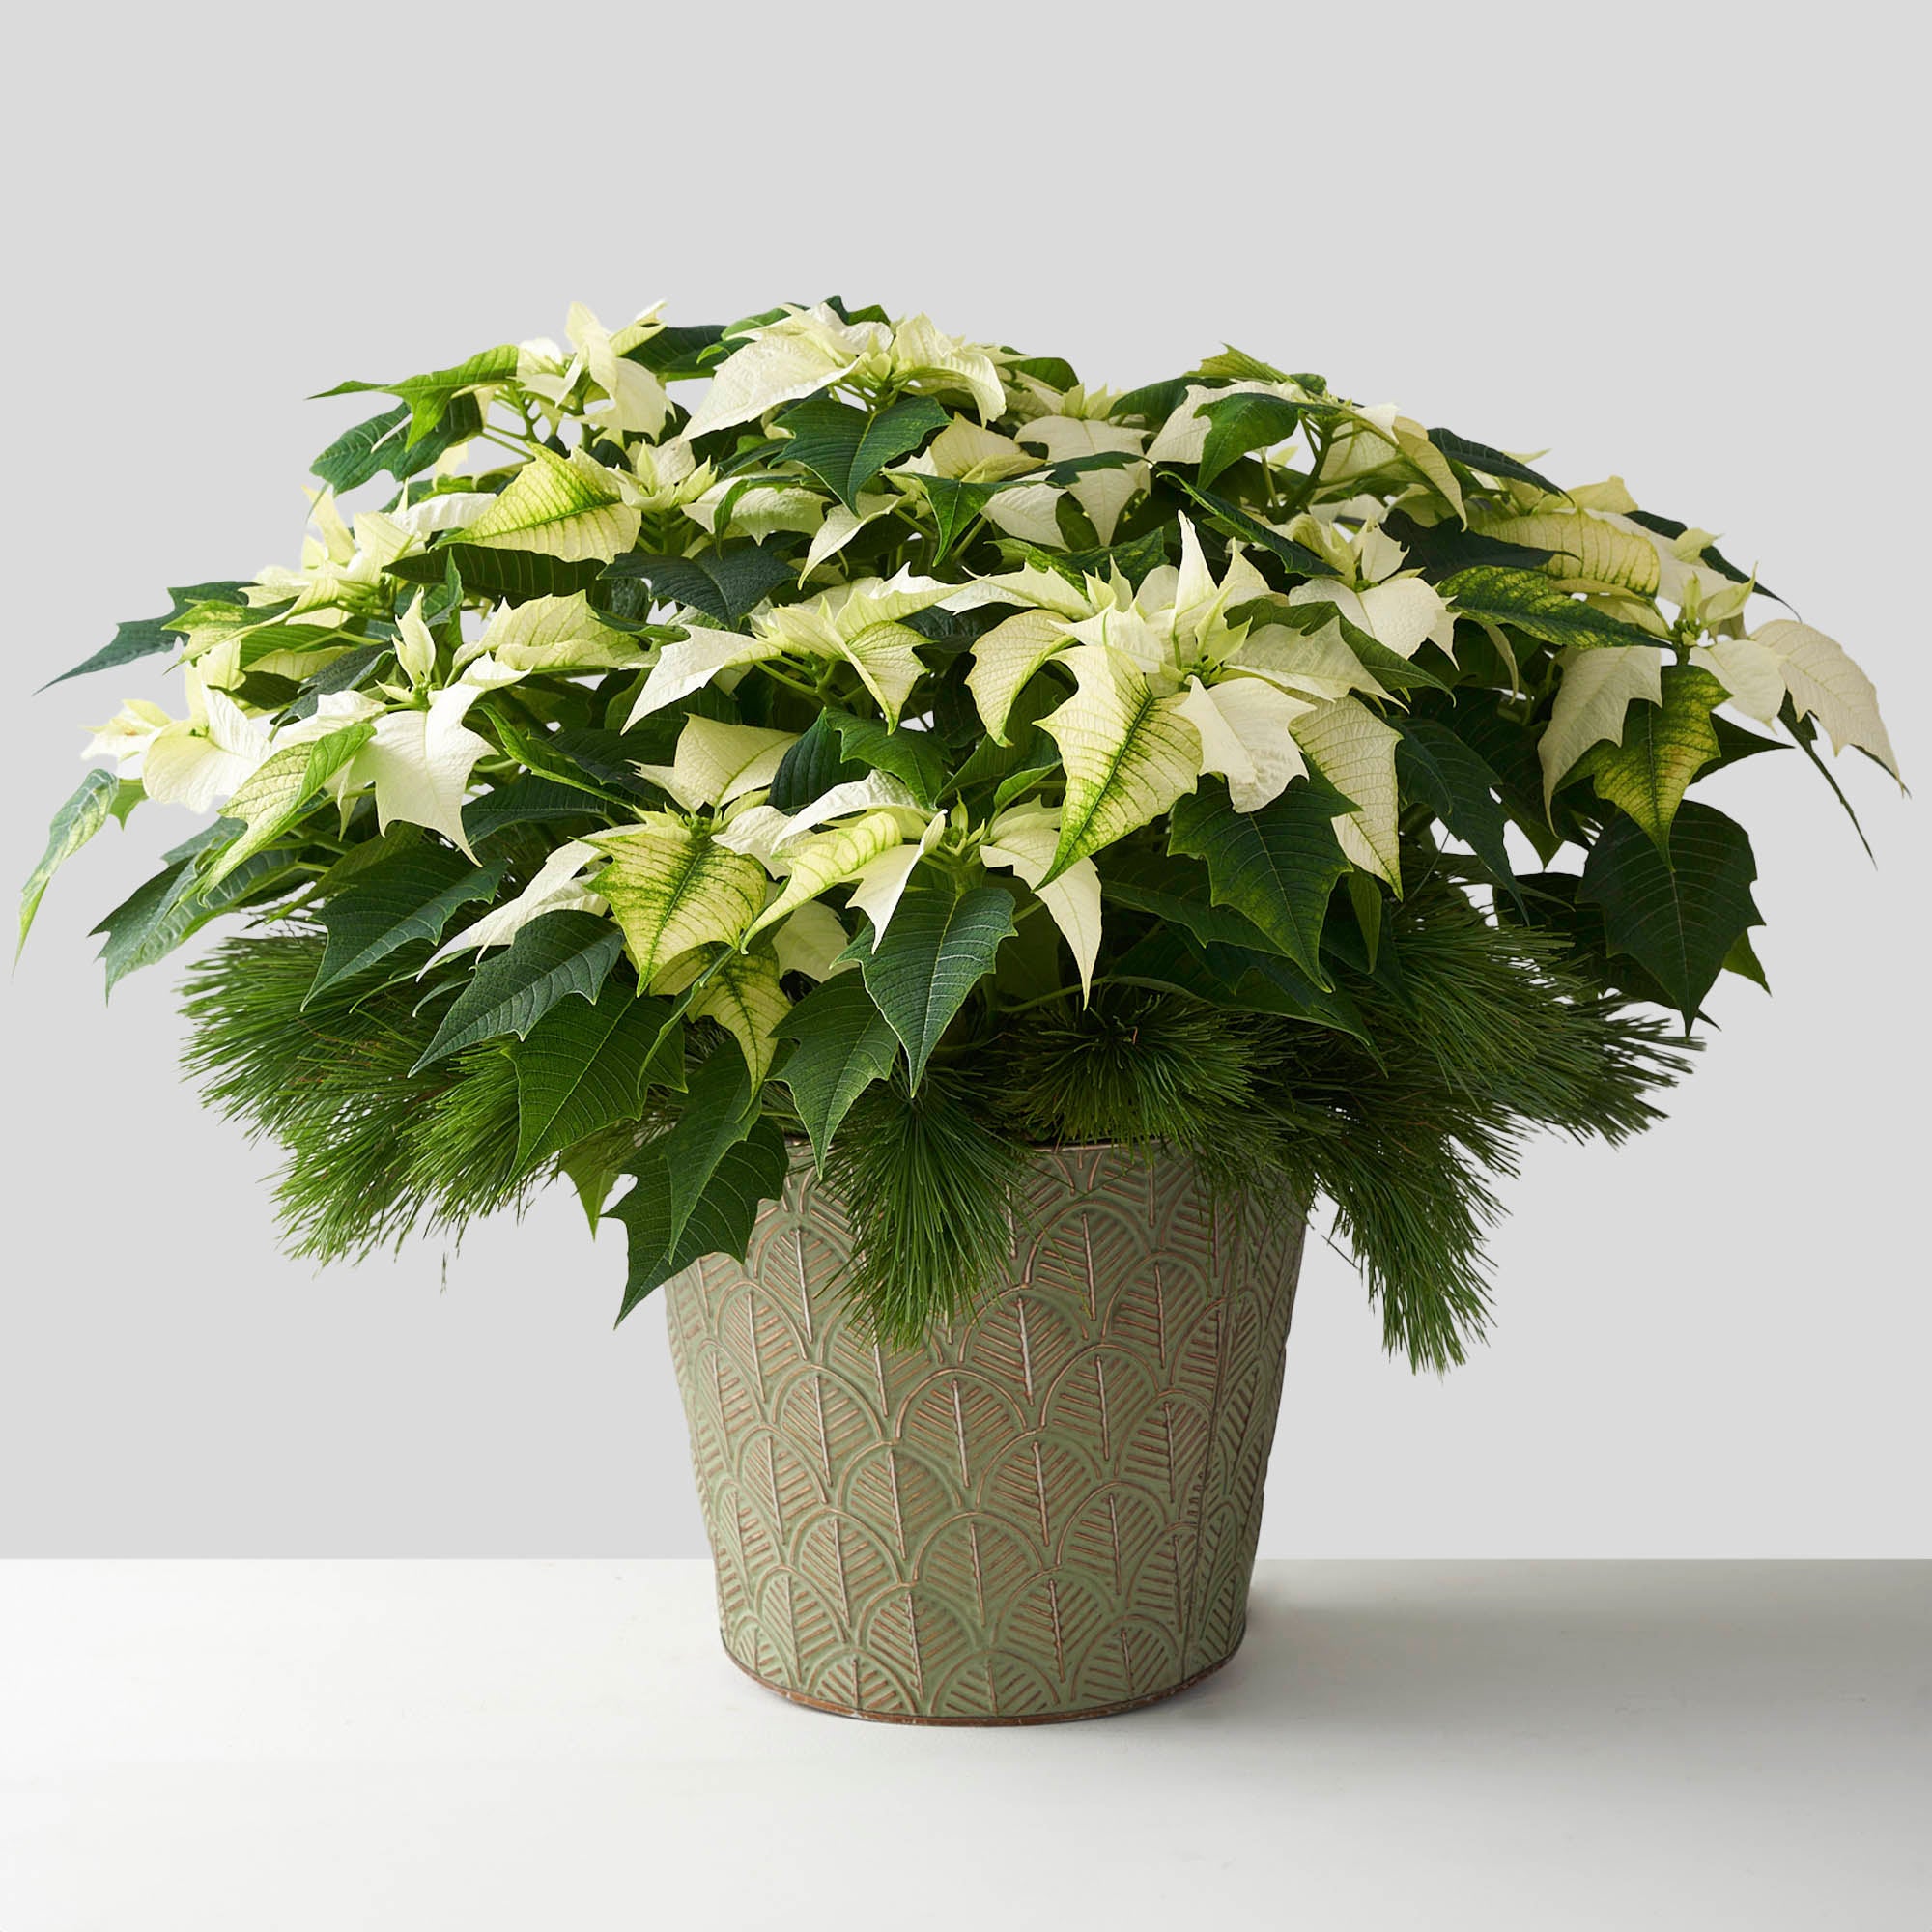 Large white poinsettia in tin pot with pine boughs.